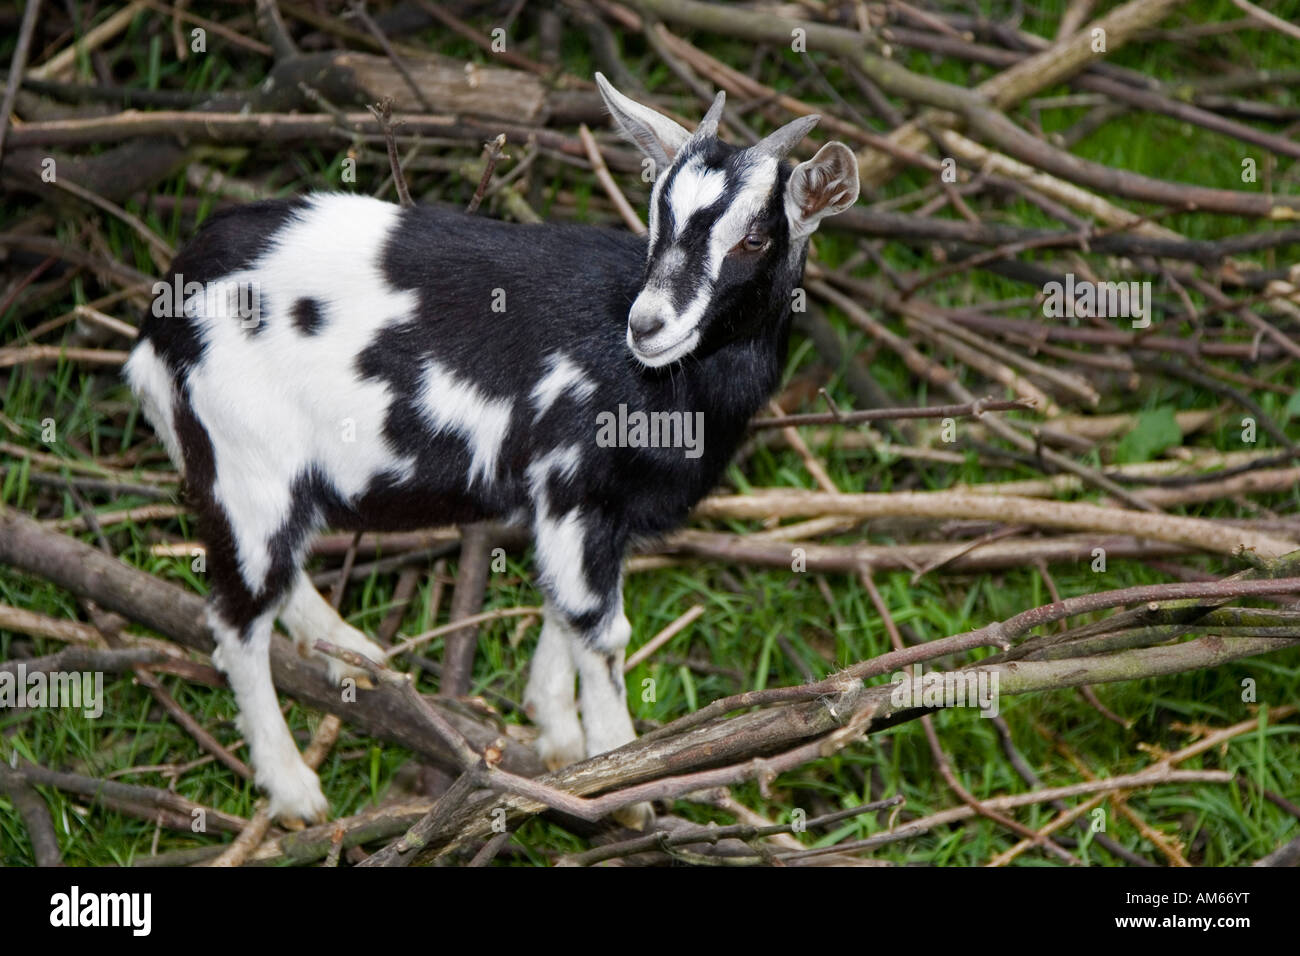 Young goat Stock Photo